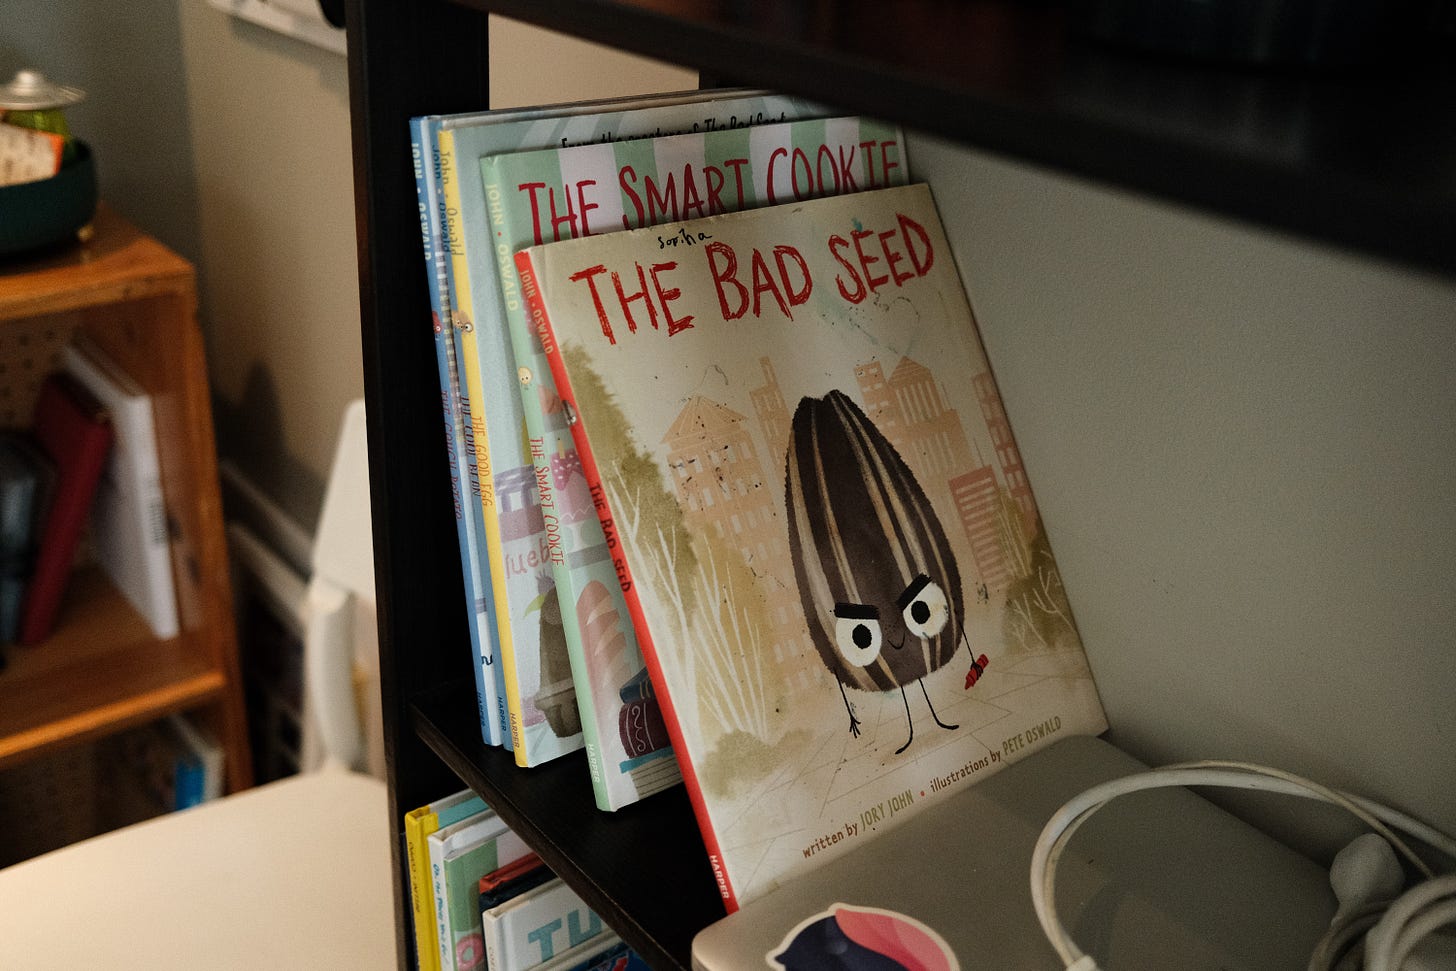 The Bad Seed by Jory John and illustrated by Pete Oswald